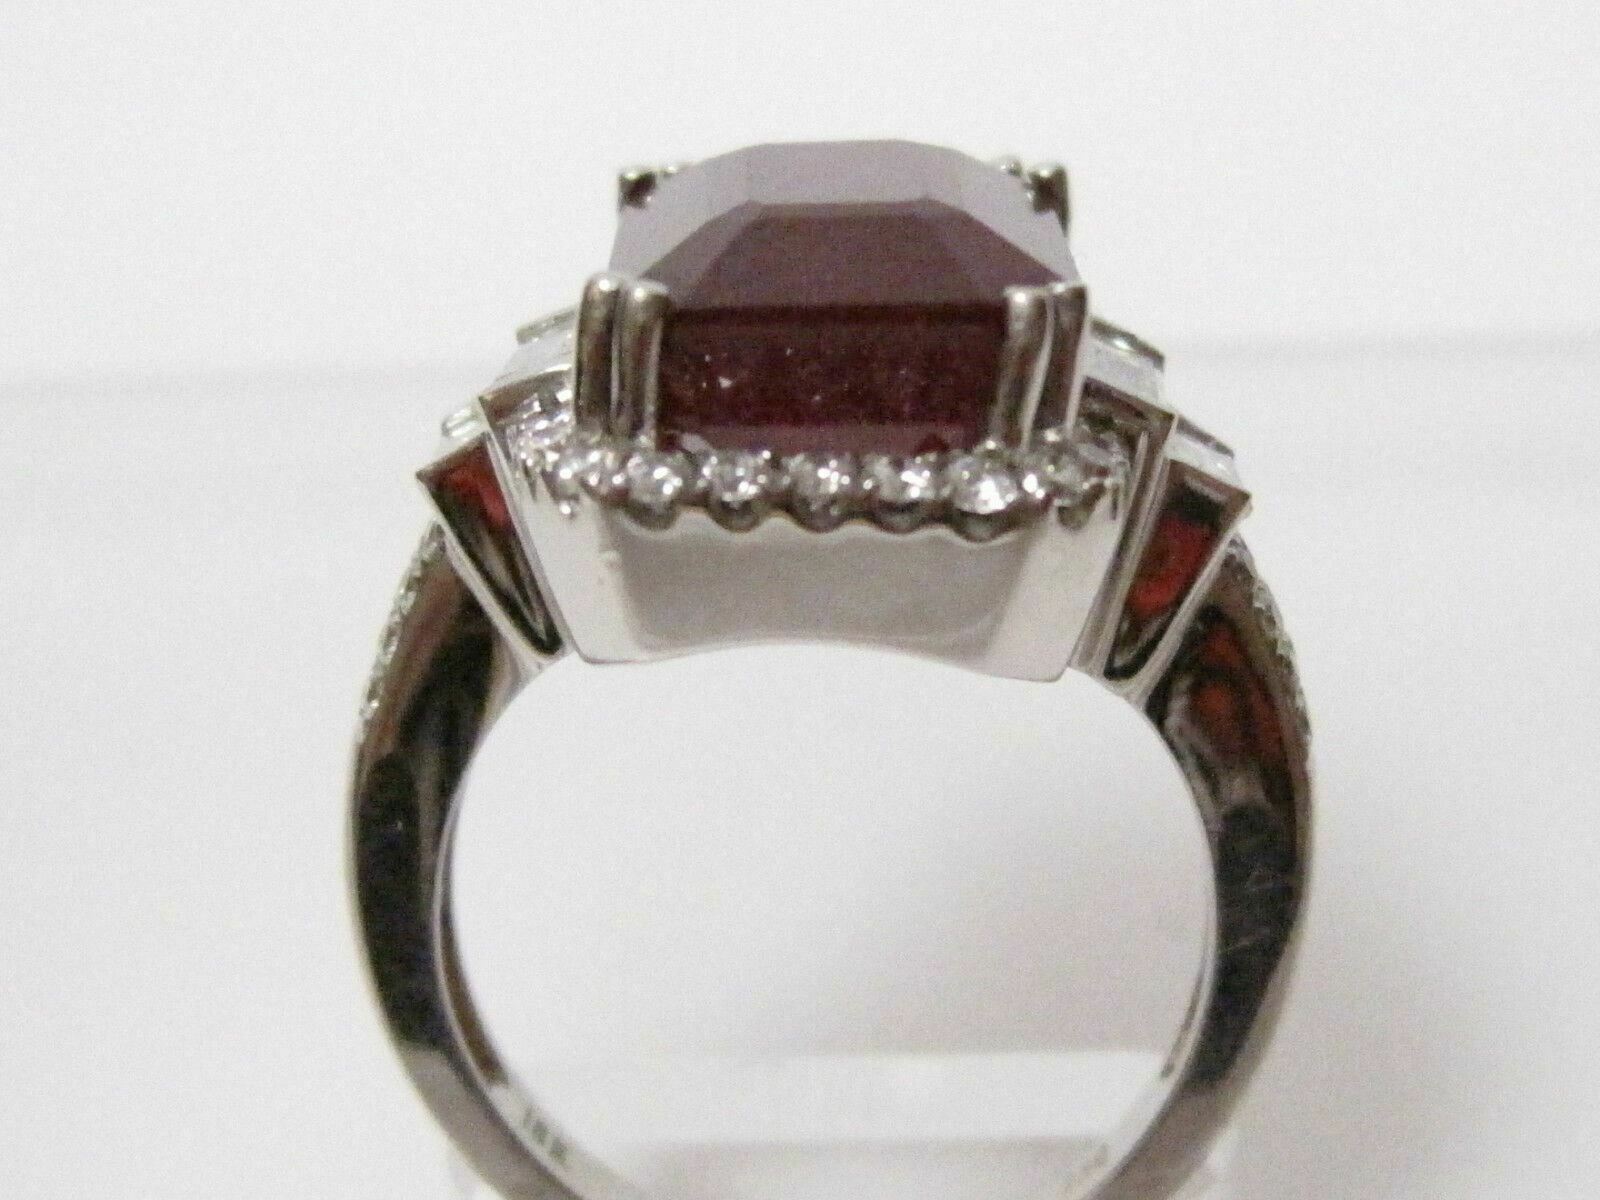 11.42 TCW Emerald Red Ruby & Round Diamond Accents Ring Size 6.5 18k White Gold